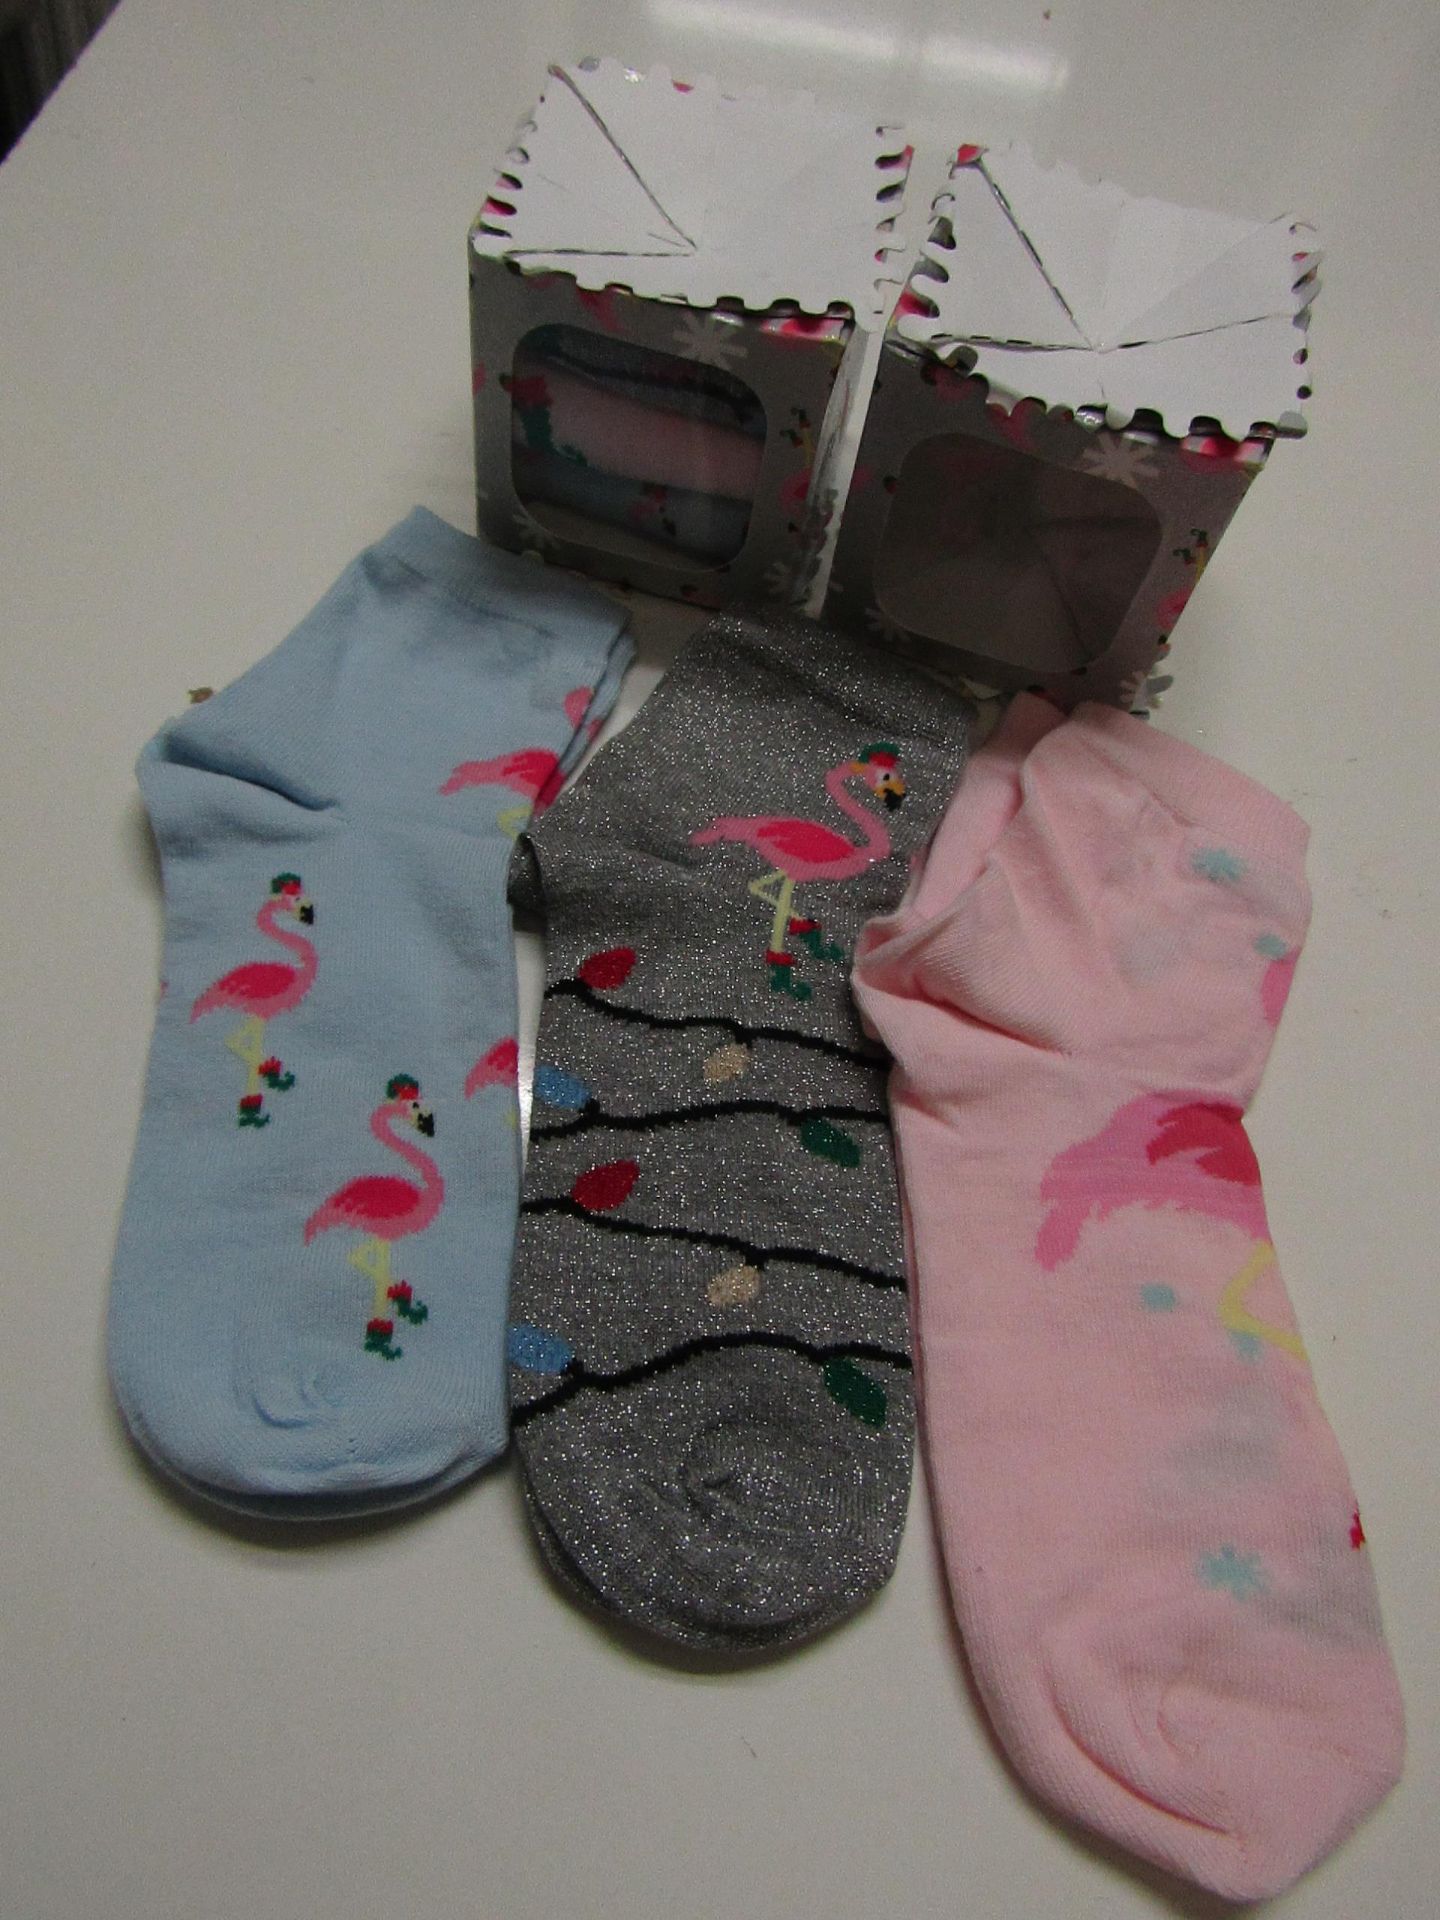 2 X Boxes of 3 Pairs of Ladies Fashion Socks Box Says One Size Approx 4-6 New & Boxed